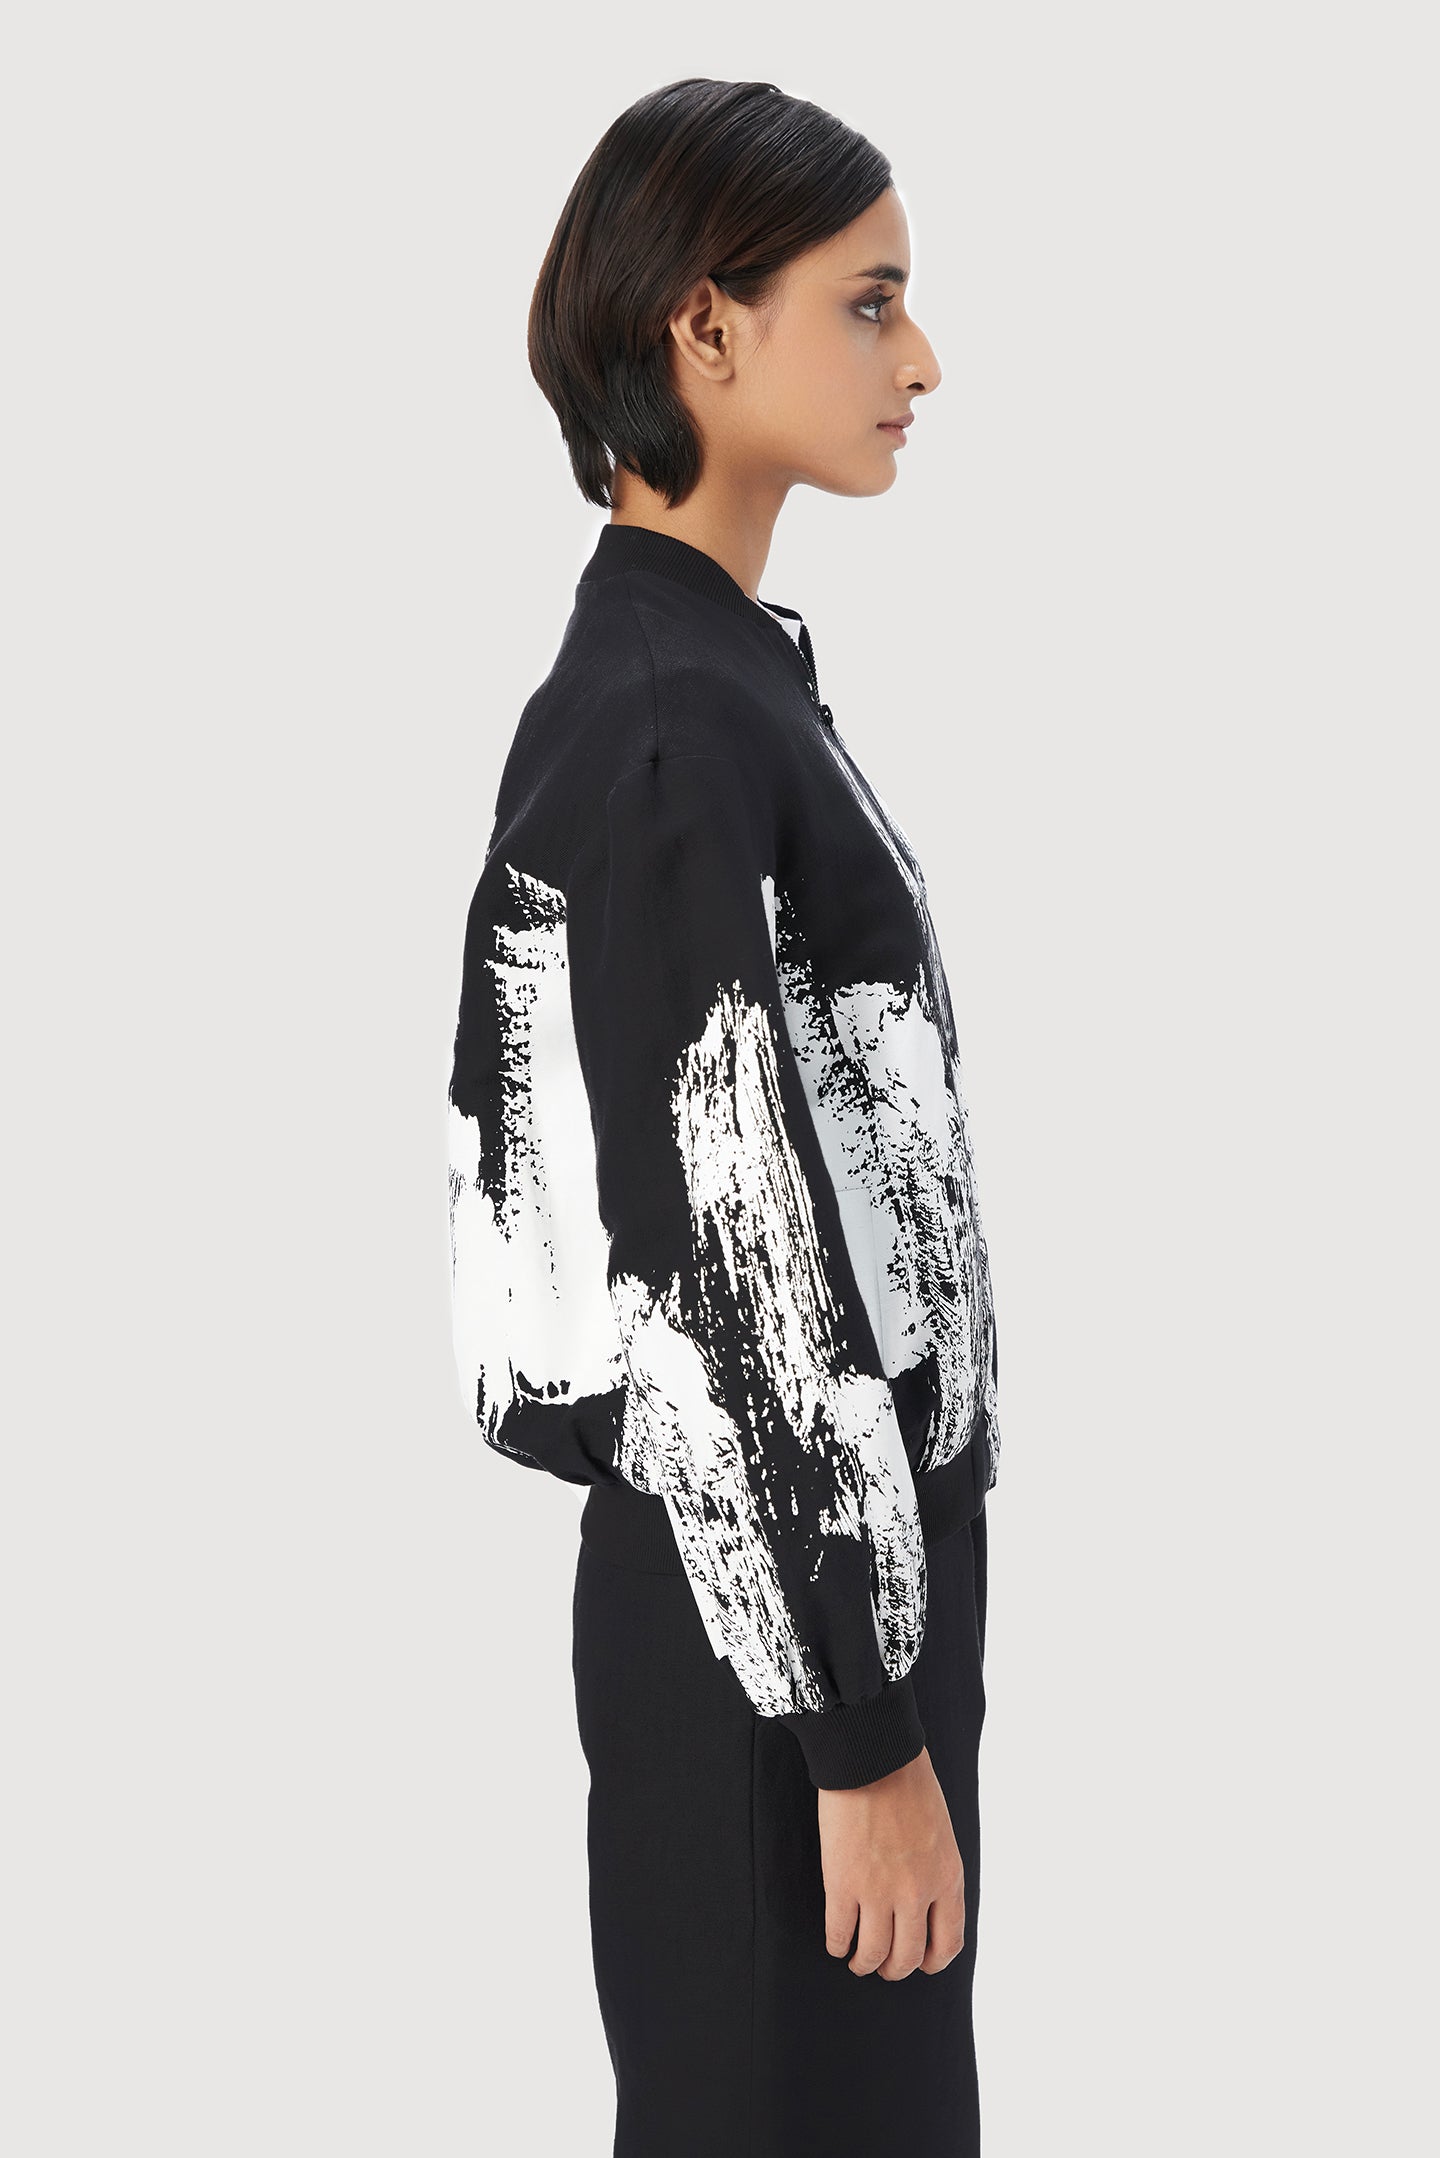 Relaxed Fit Bomber with and Brush Stroke Print Elegance